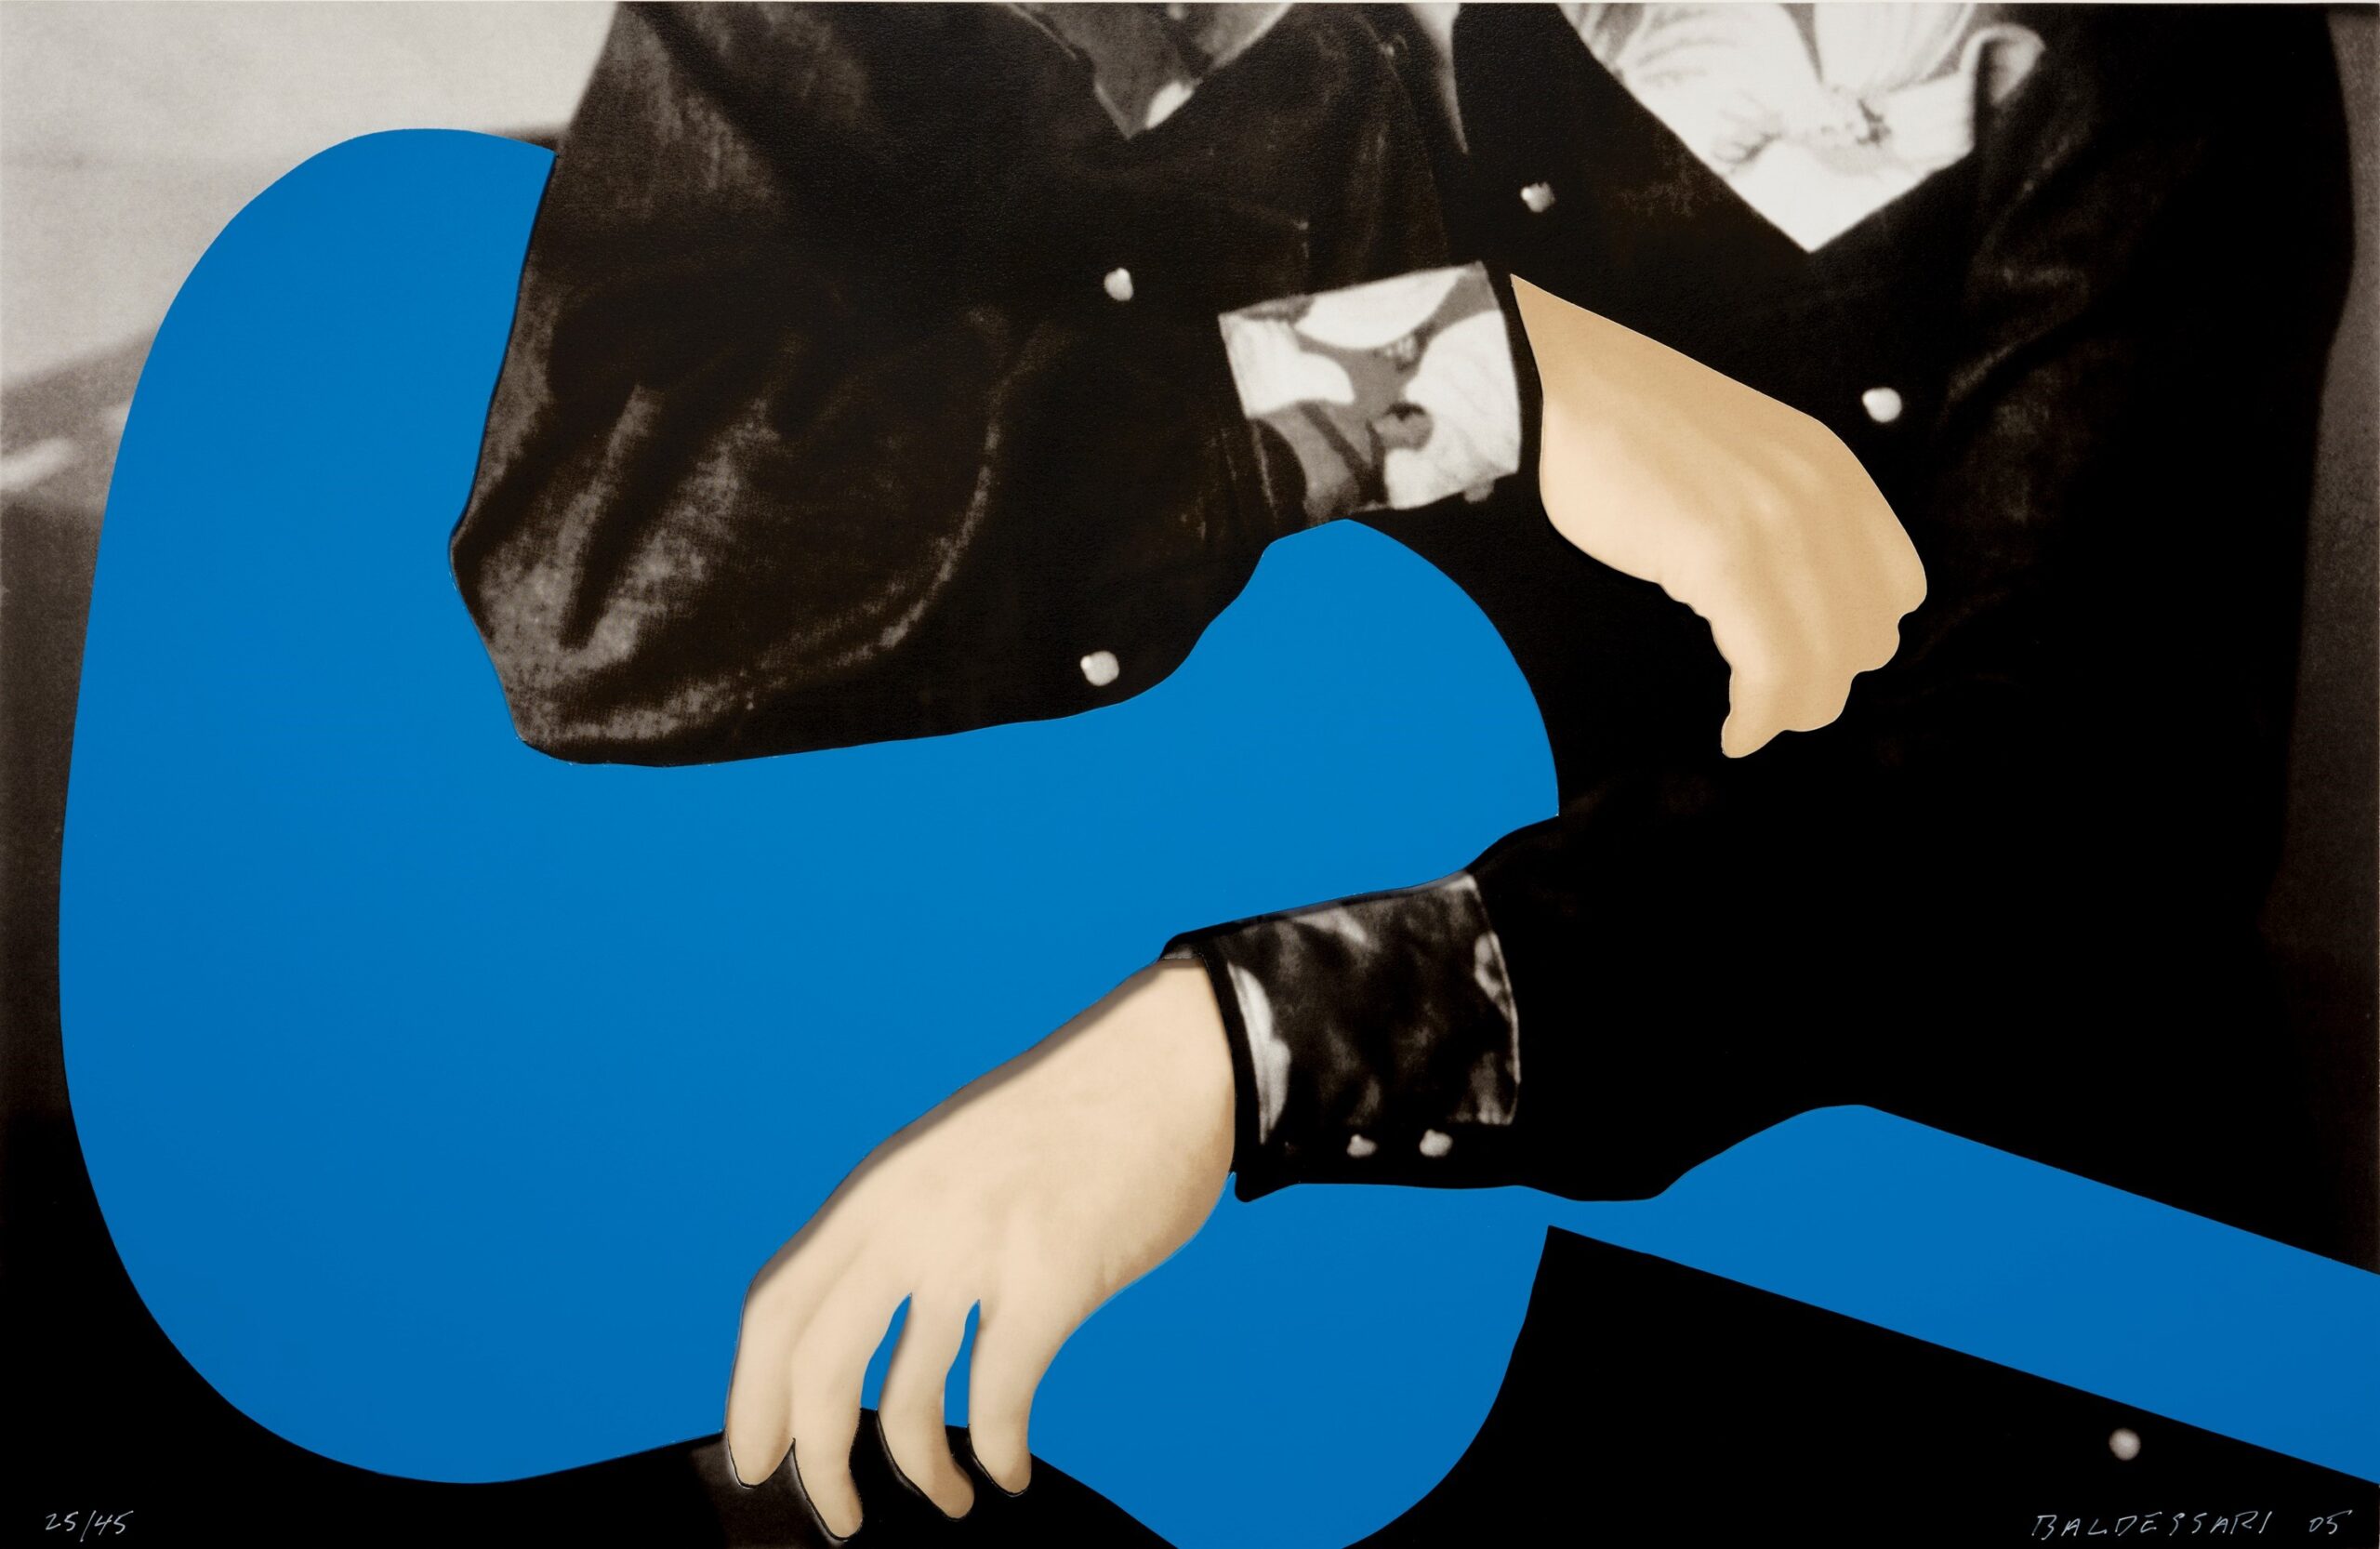 Person with Guitar (Blue), edition 25/45, 2005, John Baldessari (American, 1931–2020), color screenprint on Sintra board with hand painting. Collection of Jordan D. Schnitzer, © John Baldessari 2005. Courtesy Estate of John Baldessari © 2022. Courtesy Sprüth Magers. Image: Aaron Wessling Photography